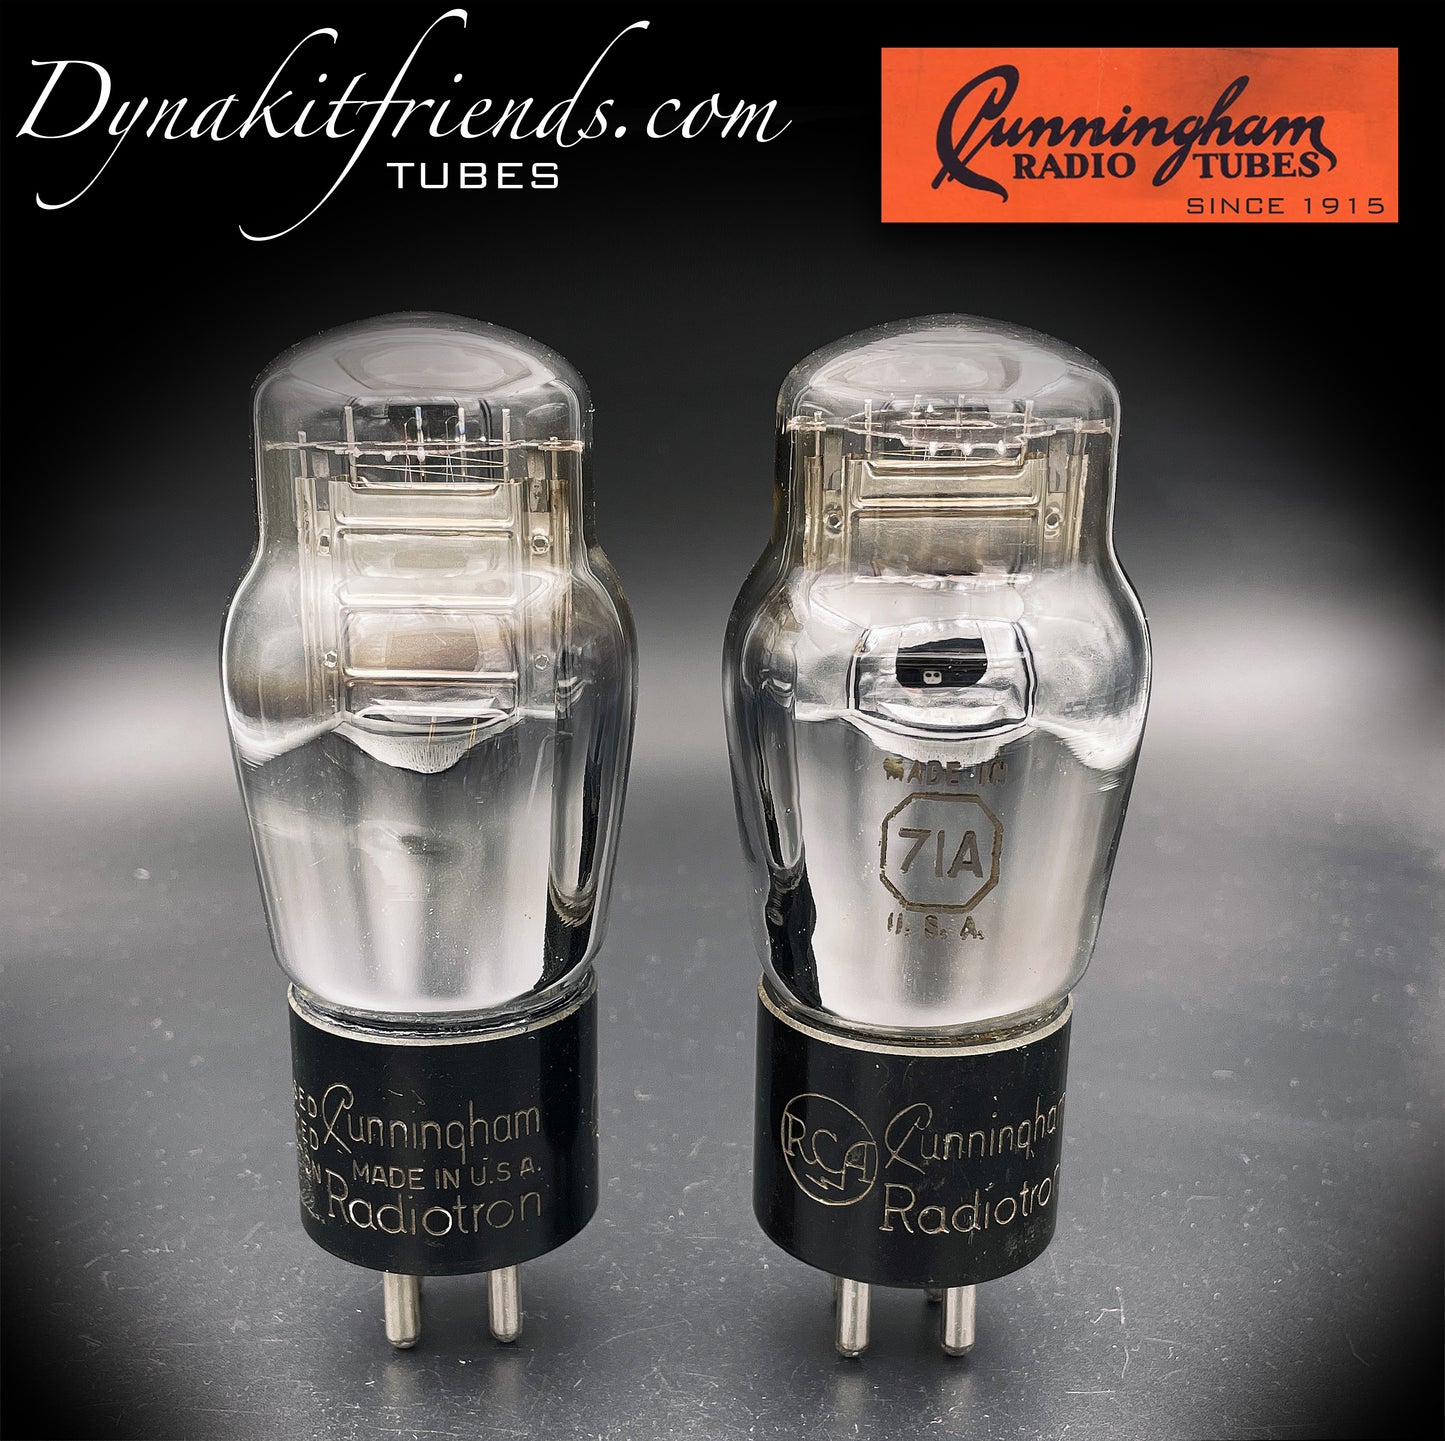 71A ST CUNNINGHAM von RCA Power Triode Matched Pair Tubes Made in USA Test NOS